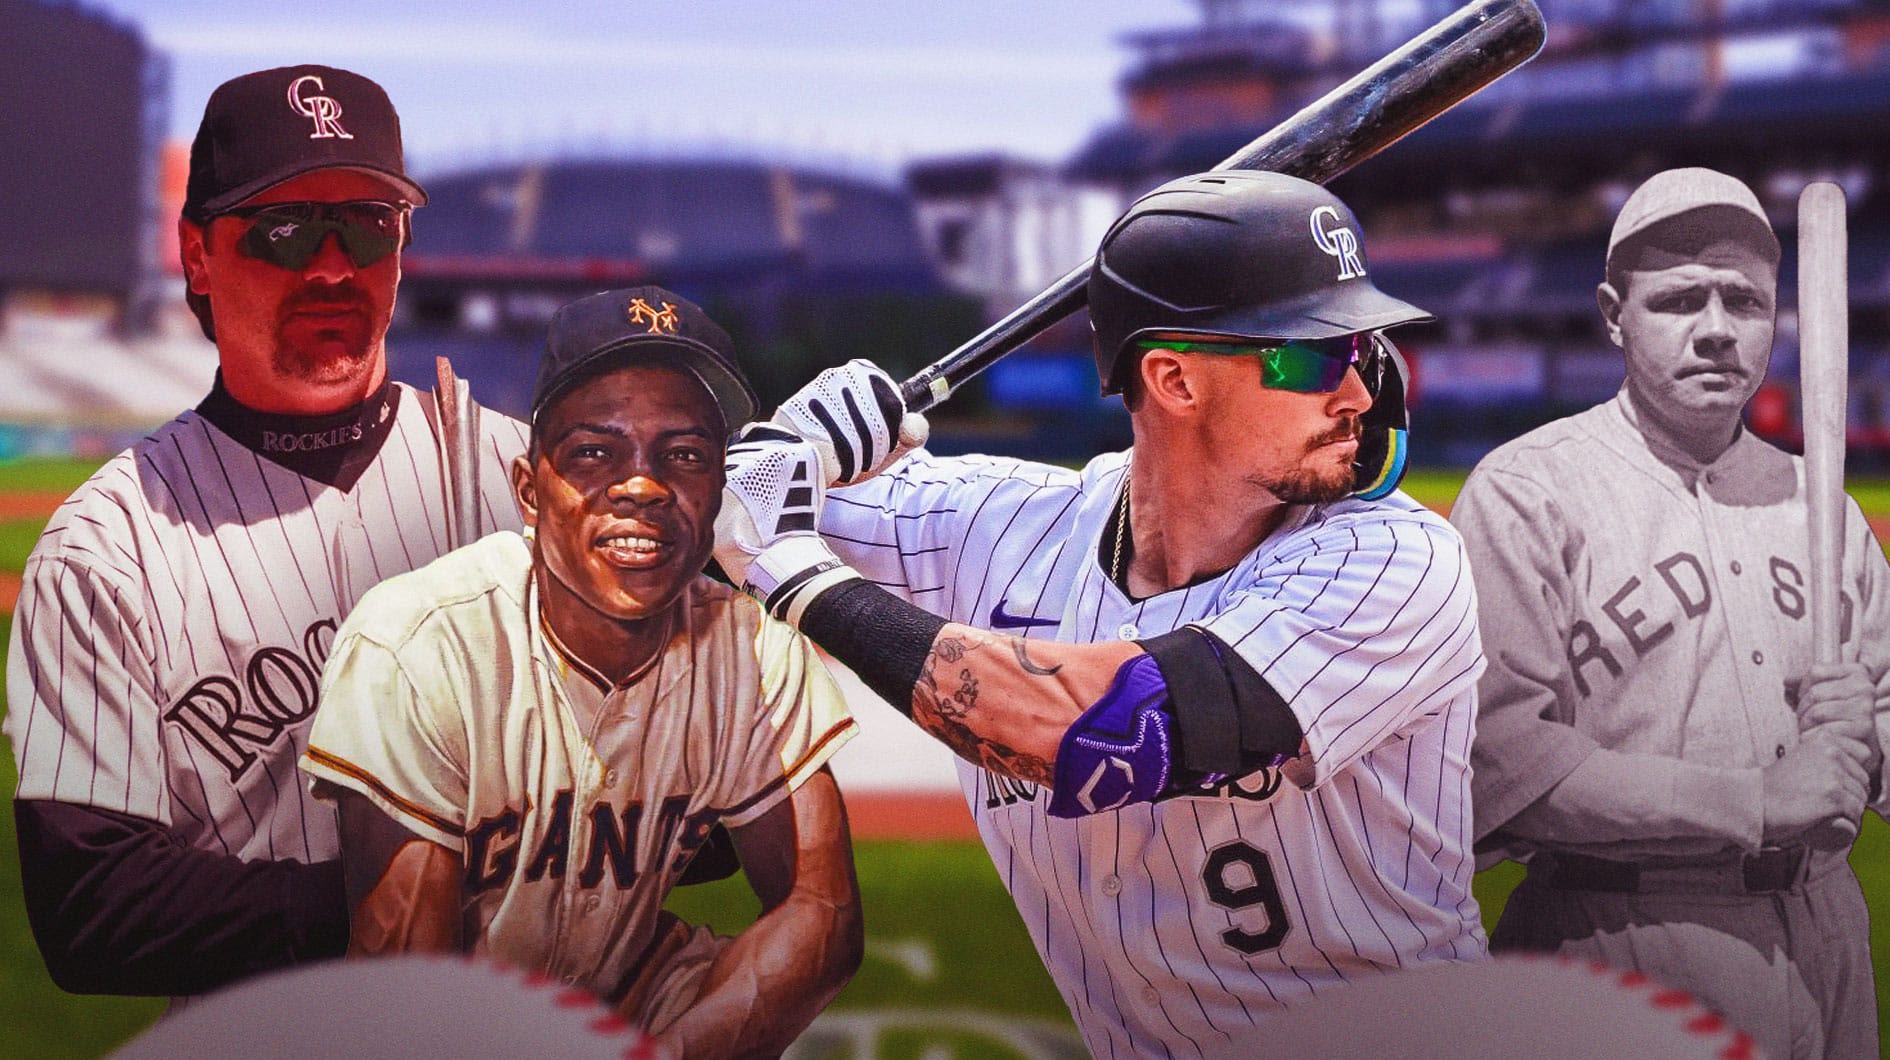 Rockies' breakout star joins exclusive club featuring Larry Walker, Babe Ruth